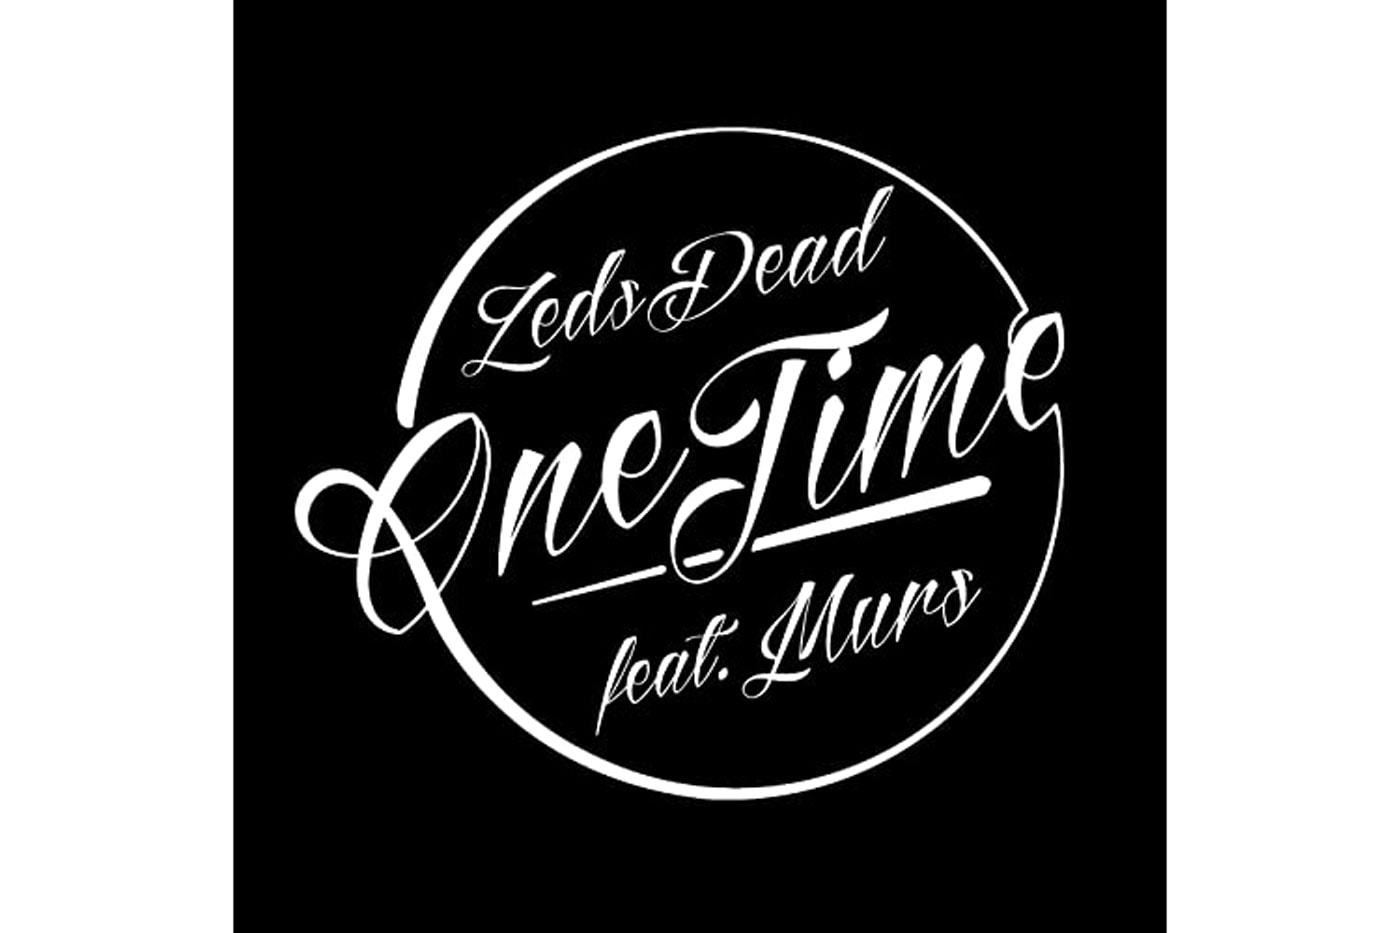 Zeds Dead featuring Murs - One Time